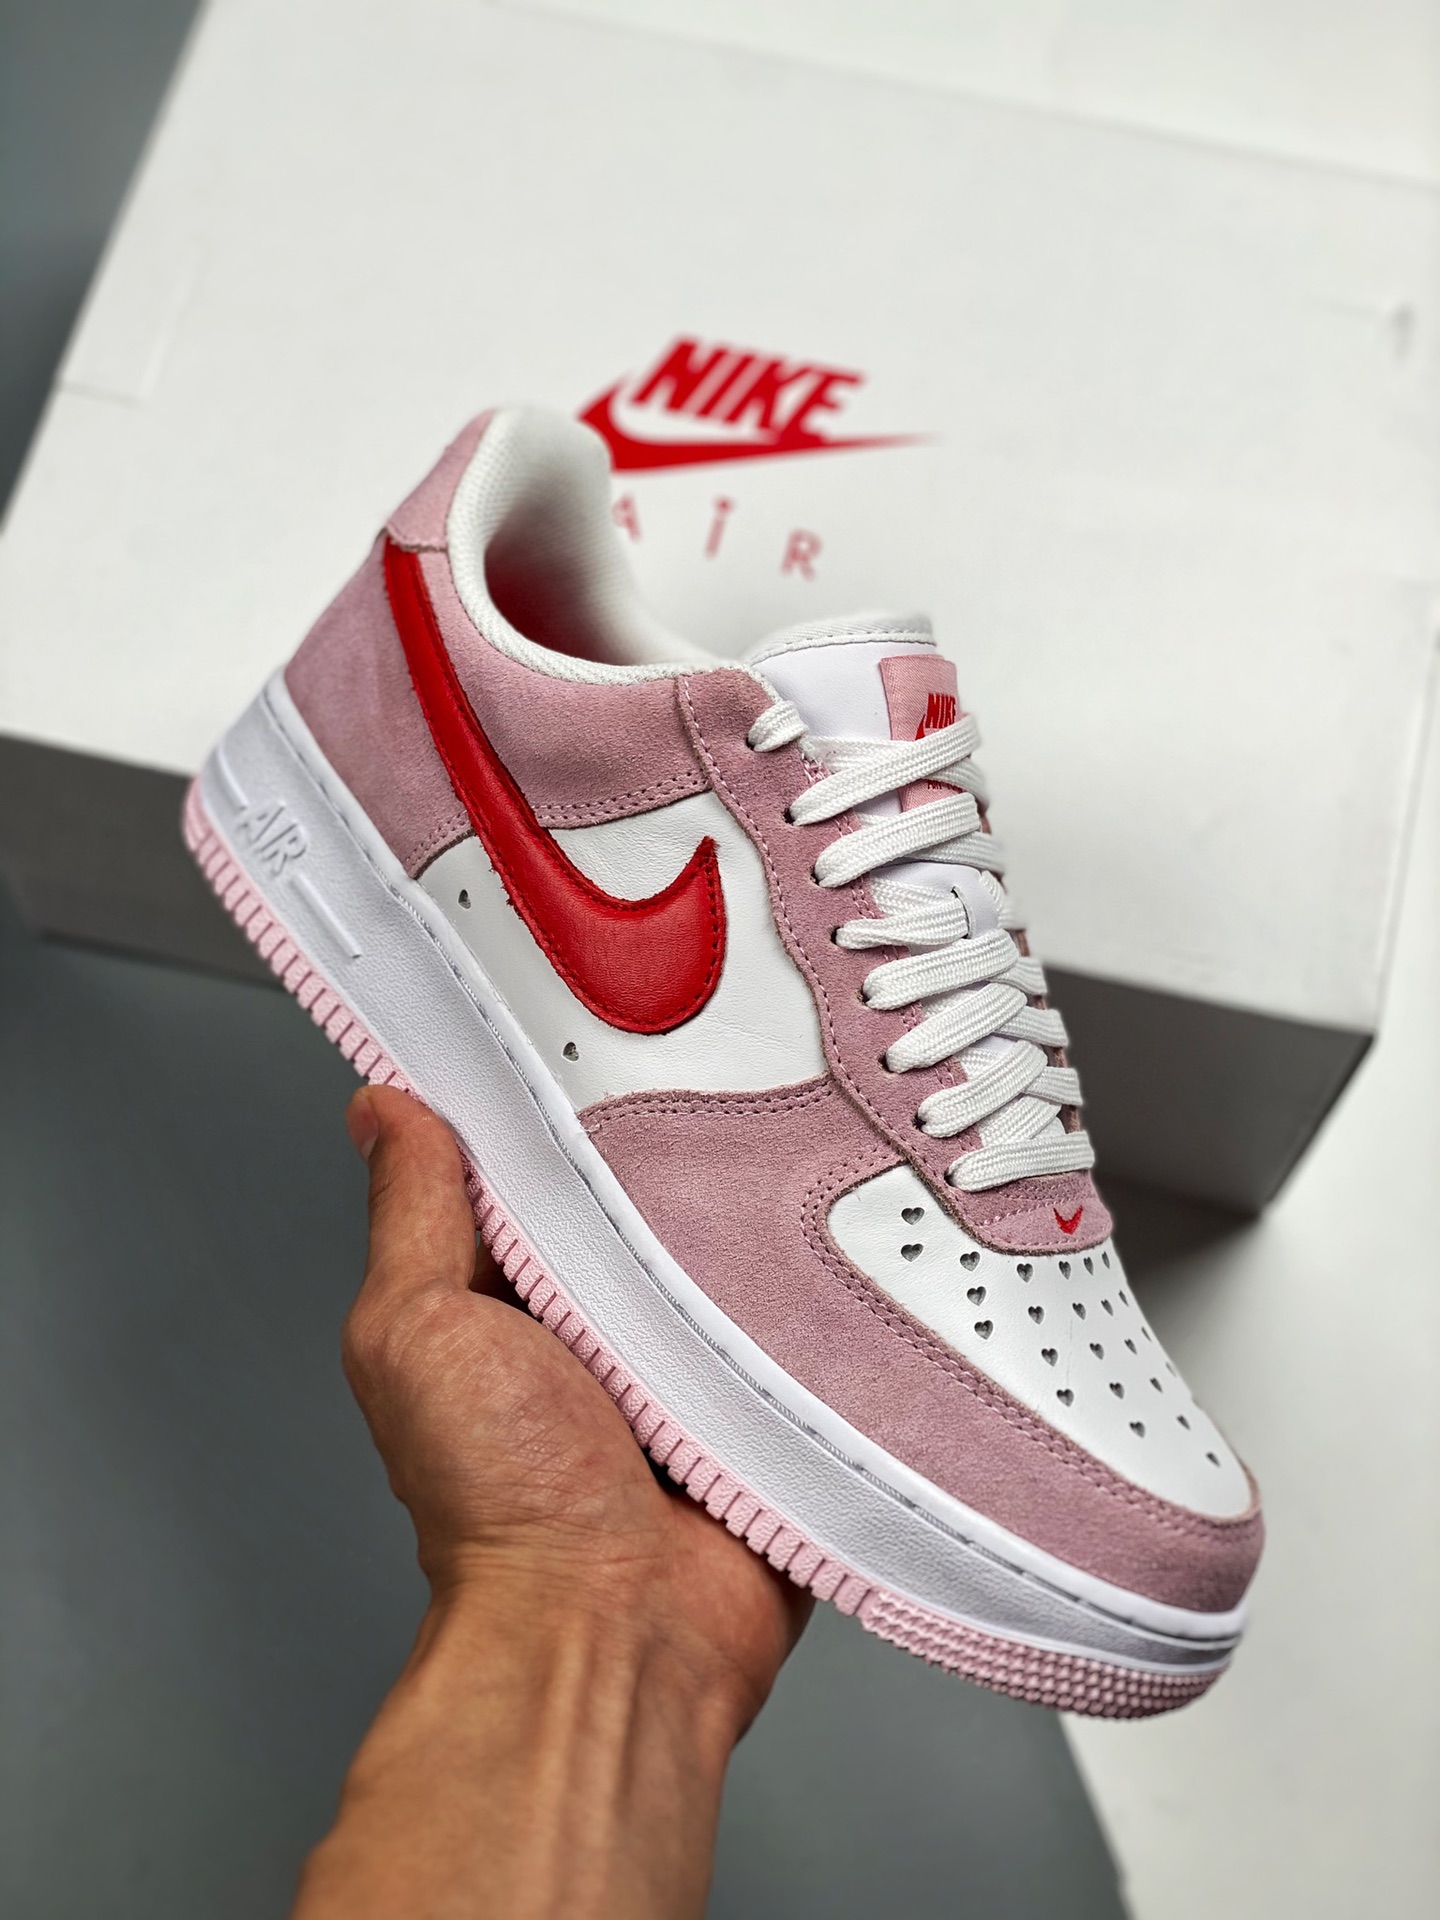 Аир лов. Nike Air Force 1 Love Letter. Nike Air Force 1 Low Love. Nike Air Force 1 Love. Womens Nike Air Force 1 se “Love for all”.